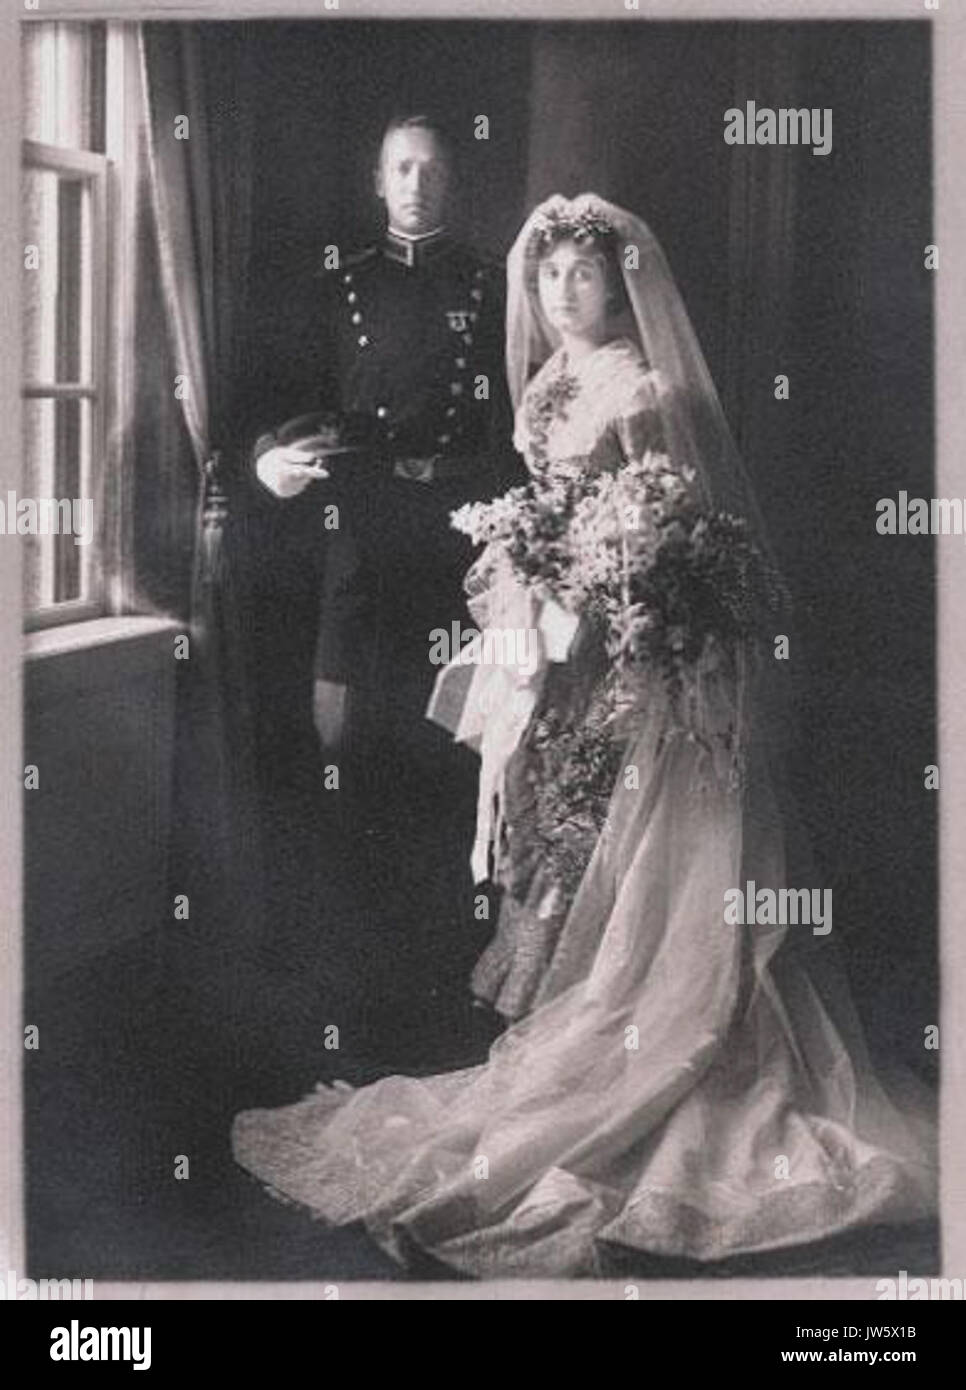 Wedding Photograph of George Patton and Beatrice Ayer Stock Photo